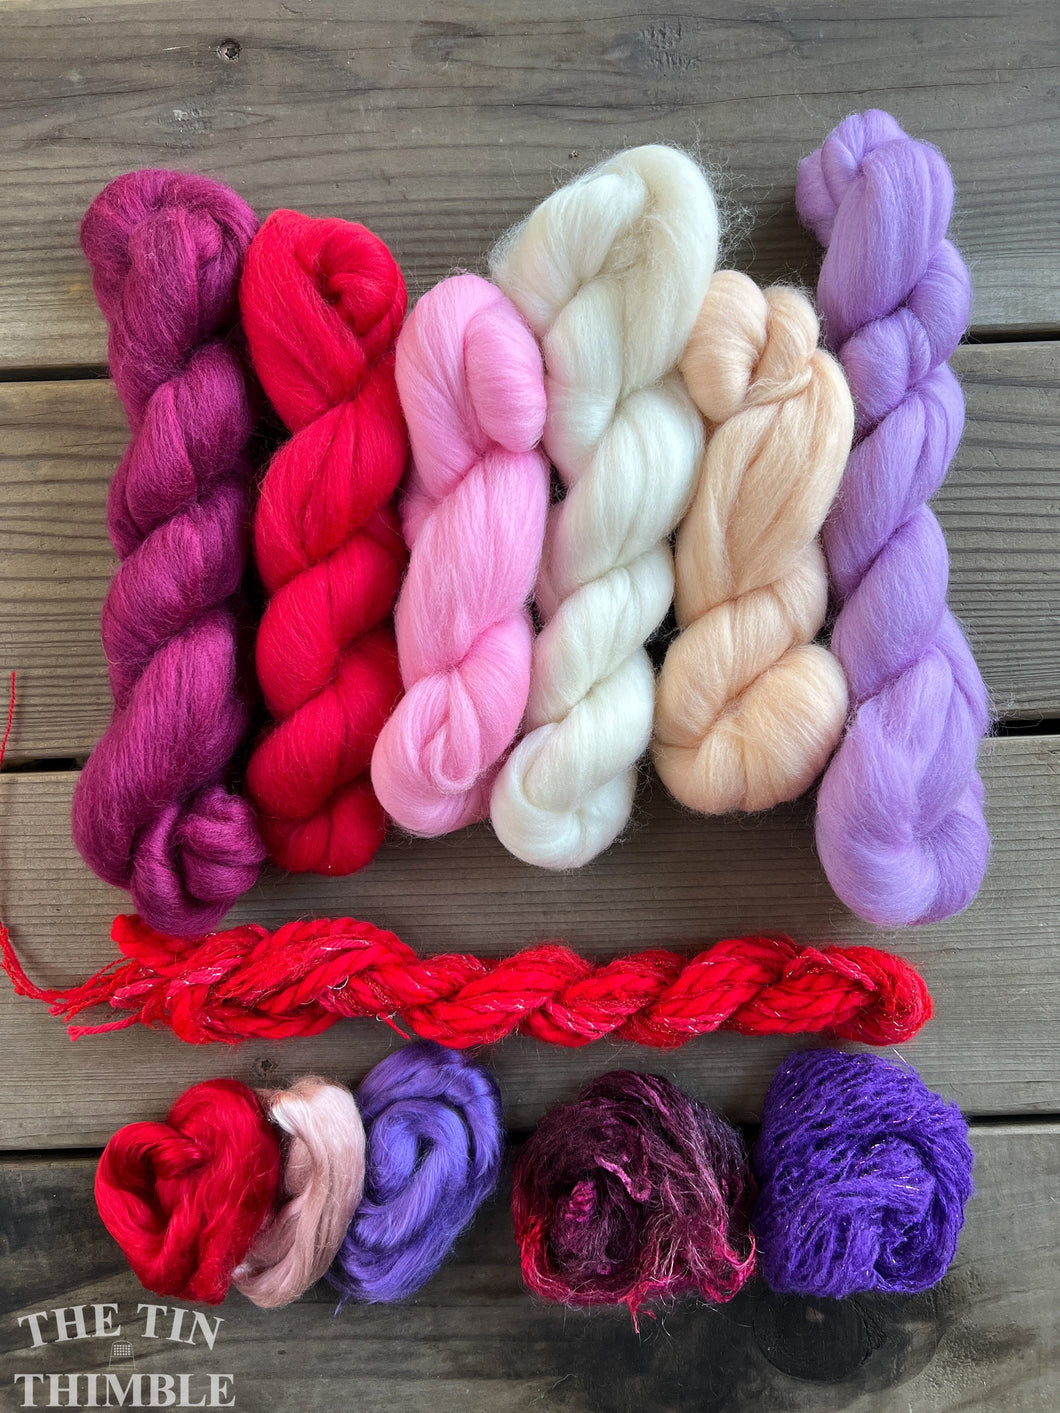 Merino Wool Roving Pack - Valentines Day - Six Colors, 1 Ounce Each - Wool for Wet and Needle Felting with or without Embellishments